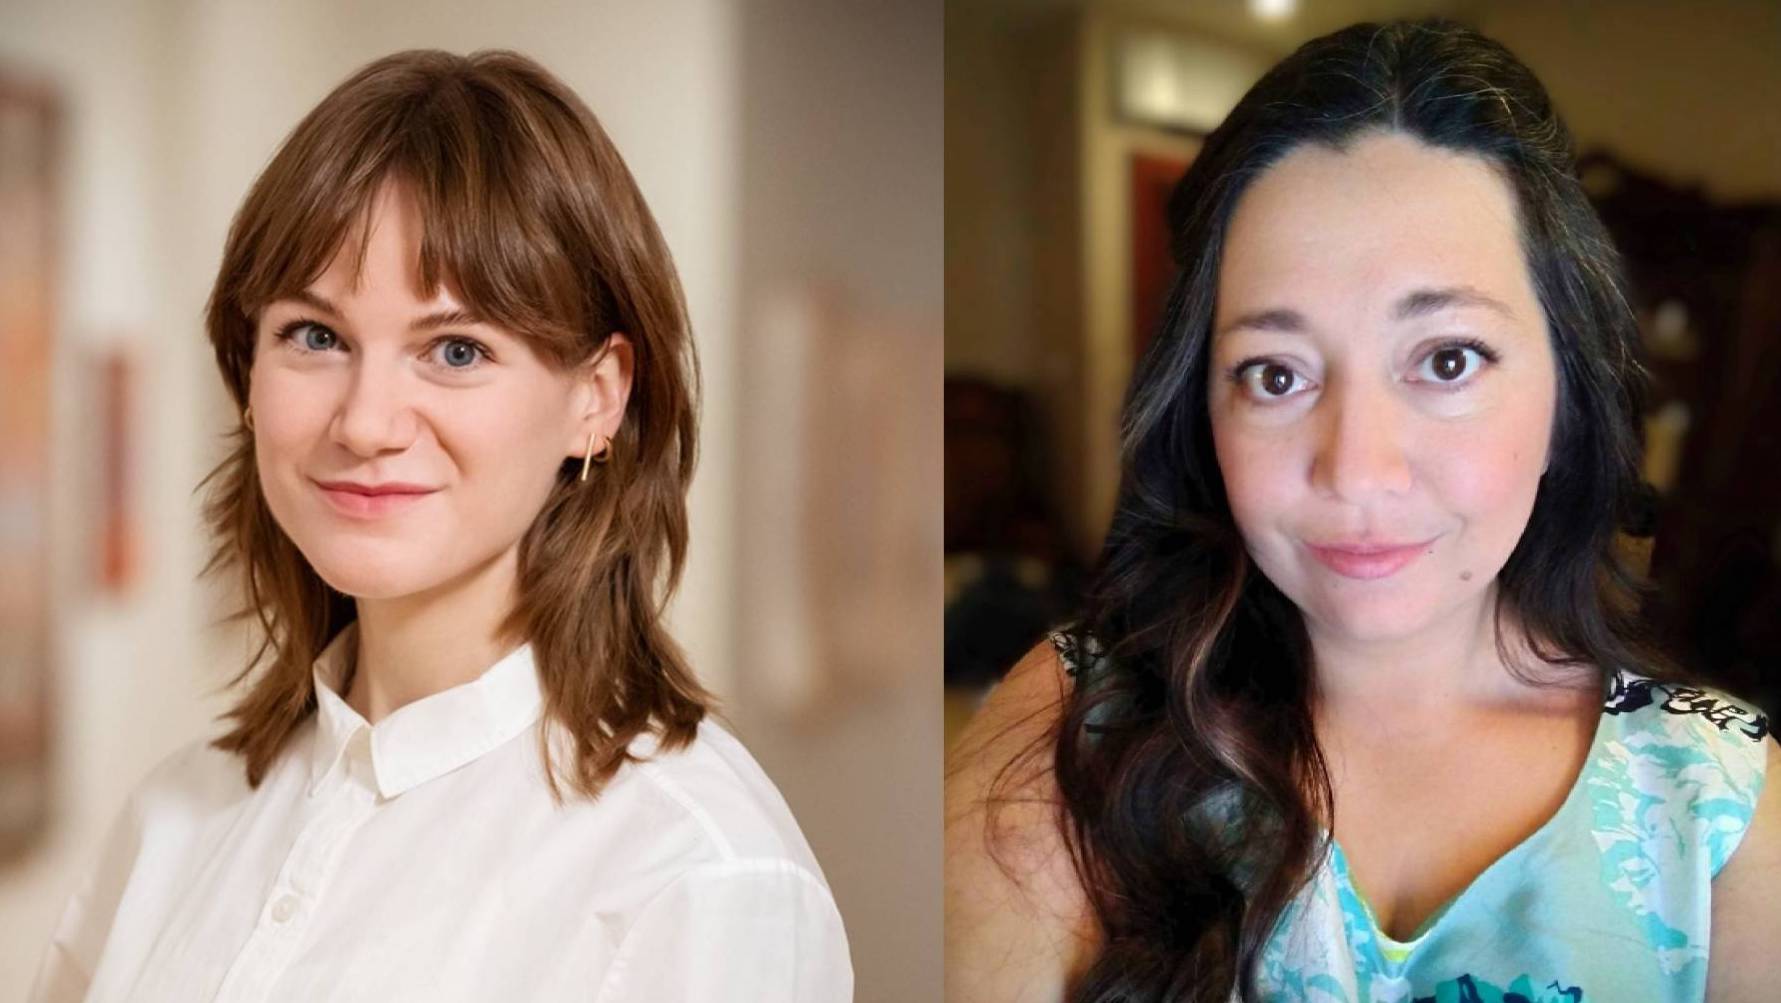 A two photo collage: left is Kamila Glowacki, a young white woman with short light brown hair, wearing a white long sleeve top, smiling at the camera. Right is Melissa Farley, a young white woman with long dark brown hair, wearing a turquoise sleeveless blouse